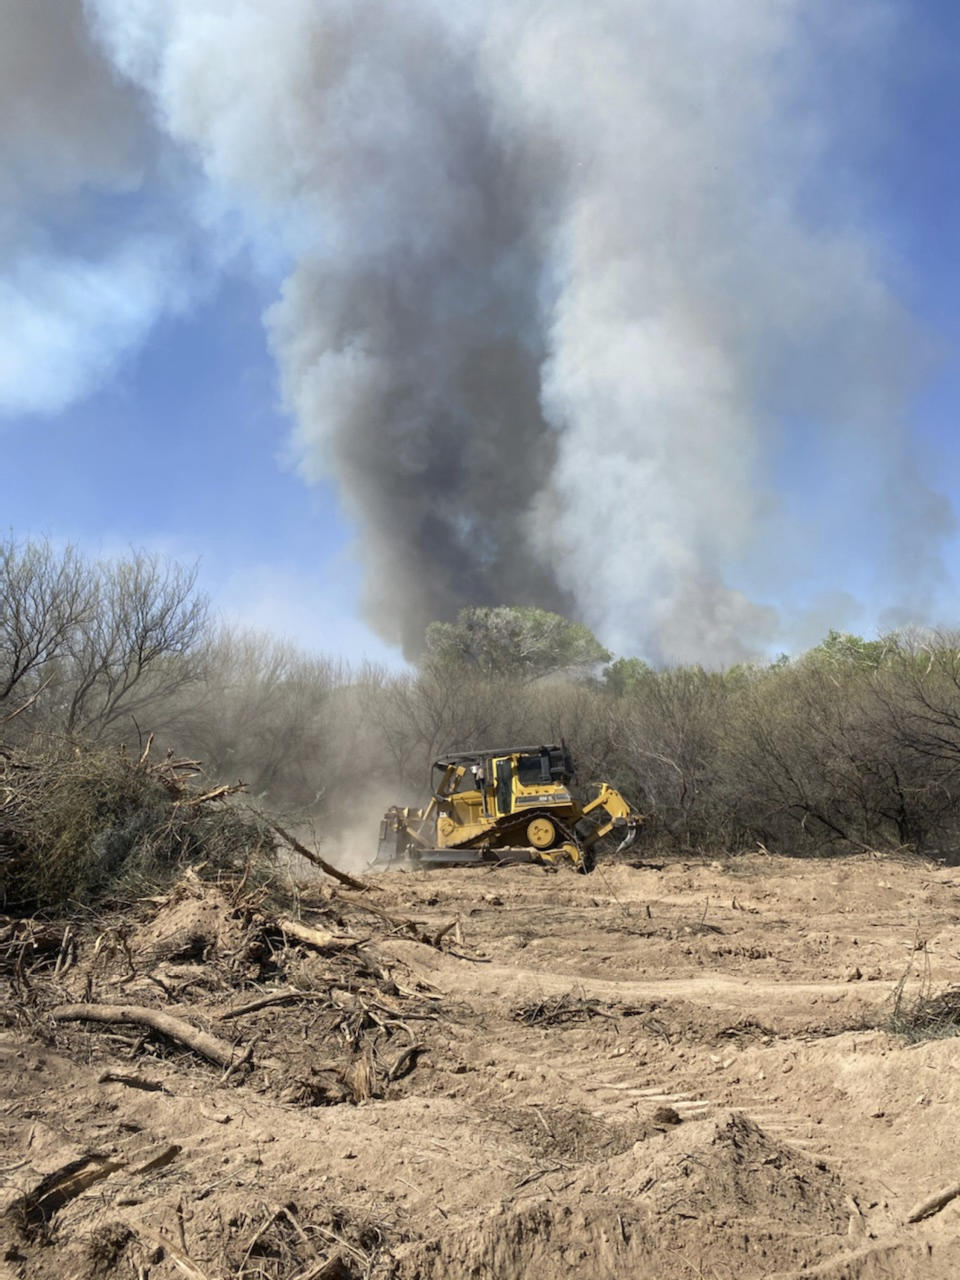 In this Friday, April 9, 2021, photo provided by the Arizona Department of Forestry and Fire Management, Heavy machinery clear thick tamarisk in a river bottom as the Pinal County Wildfire burns near rural properties in Dudleyville, Ariz. A small community in south-central Arizona remained under an evacuation notice Friday after crews and air tankers stopped the growth of a wildfire that burned at least 12 homes, officials said. (Arizona Department of Forestry & Fire Management via AP)